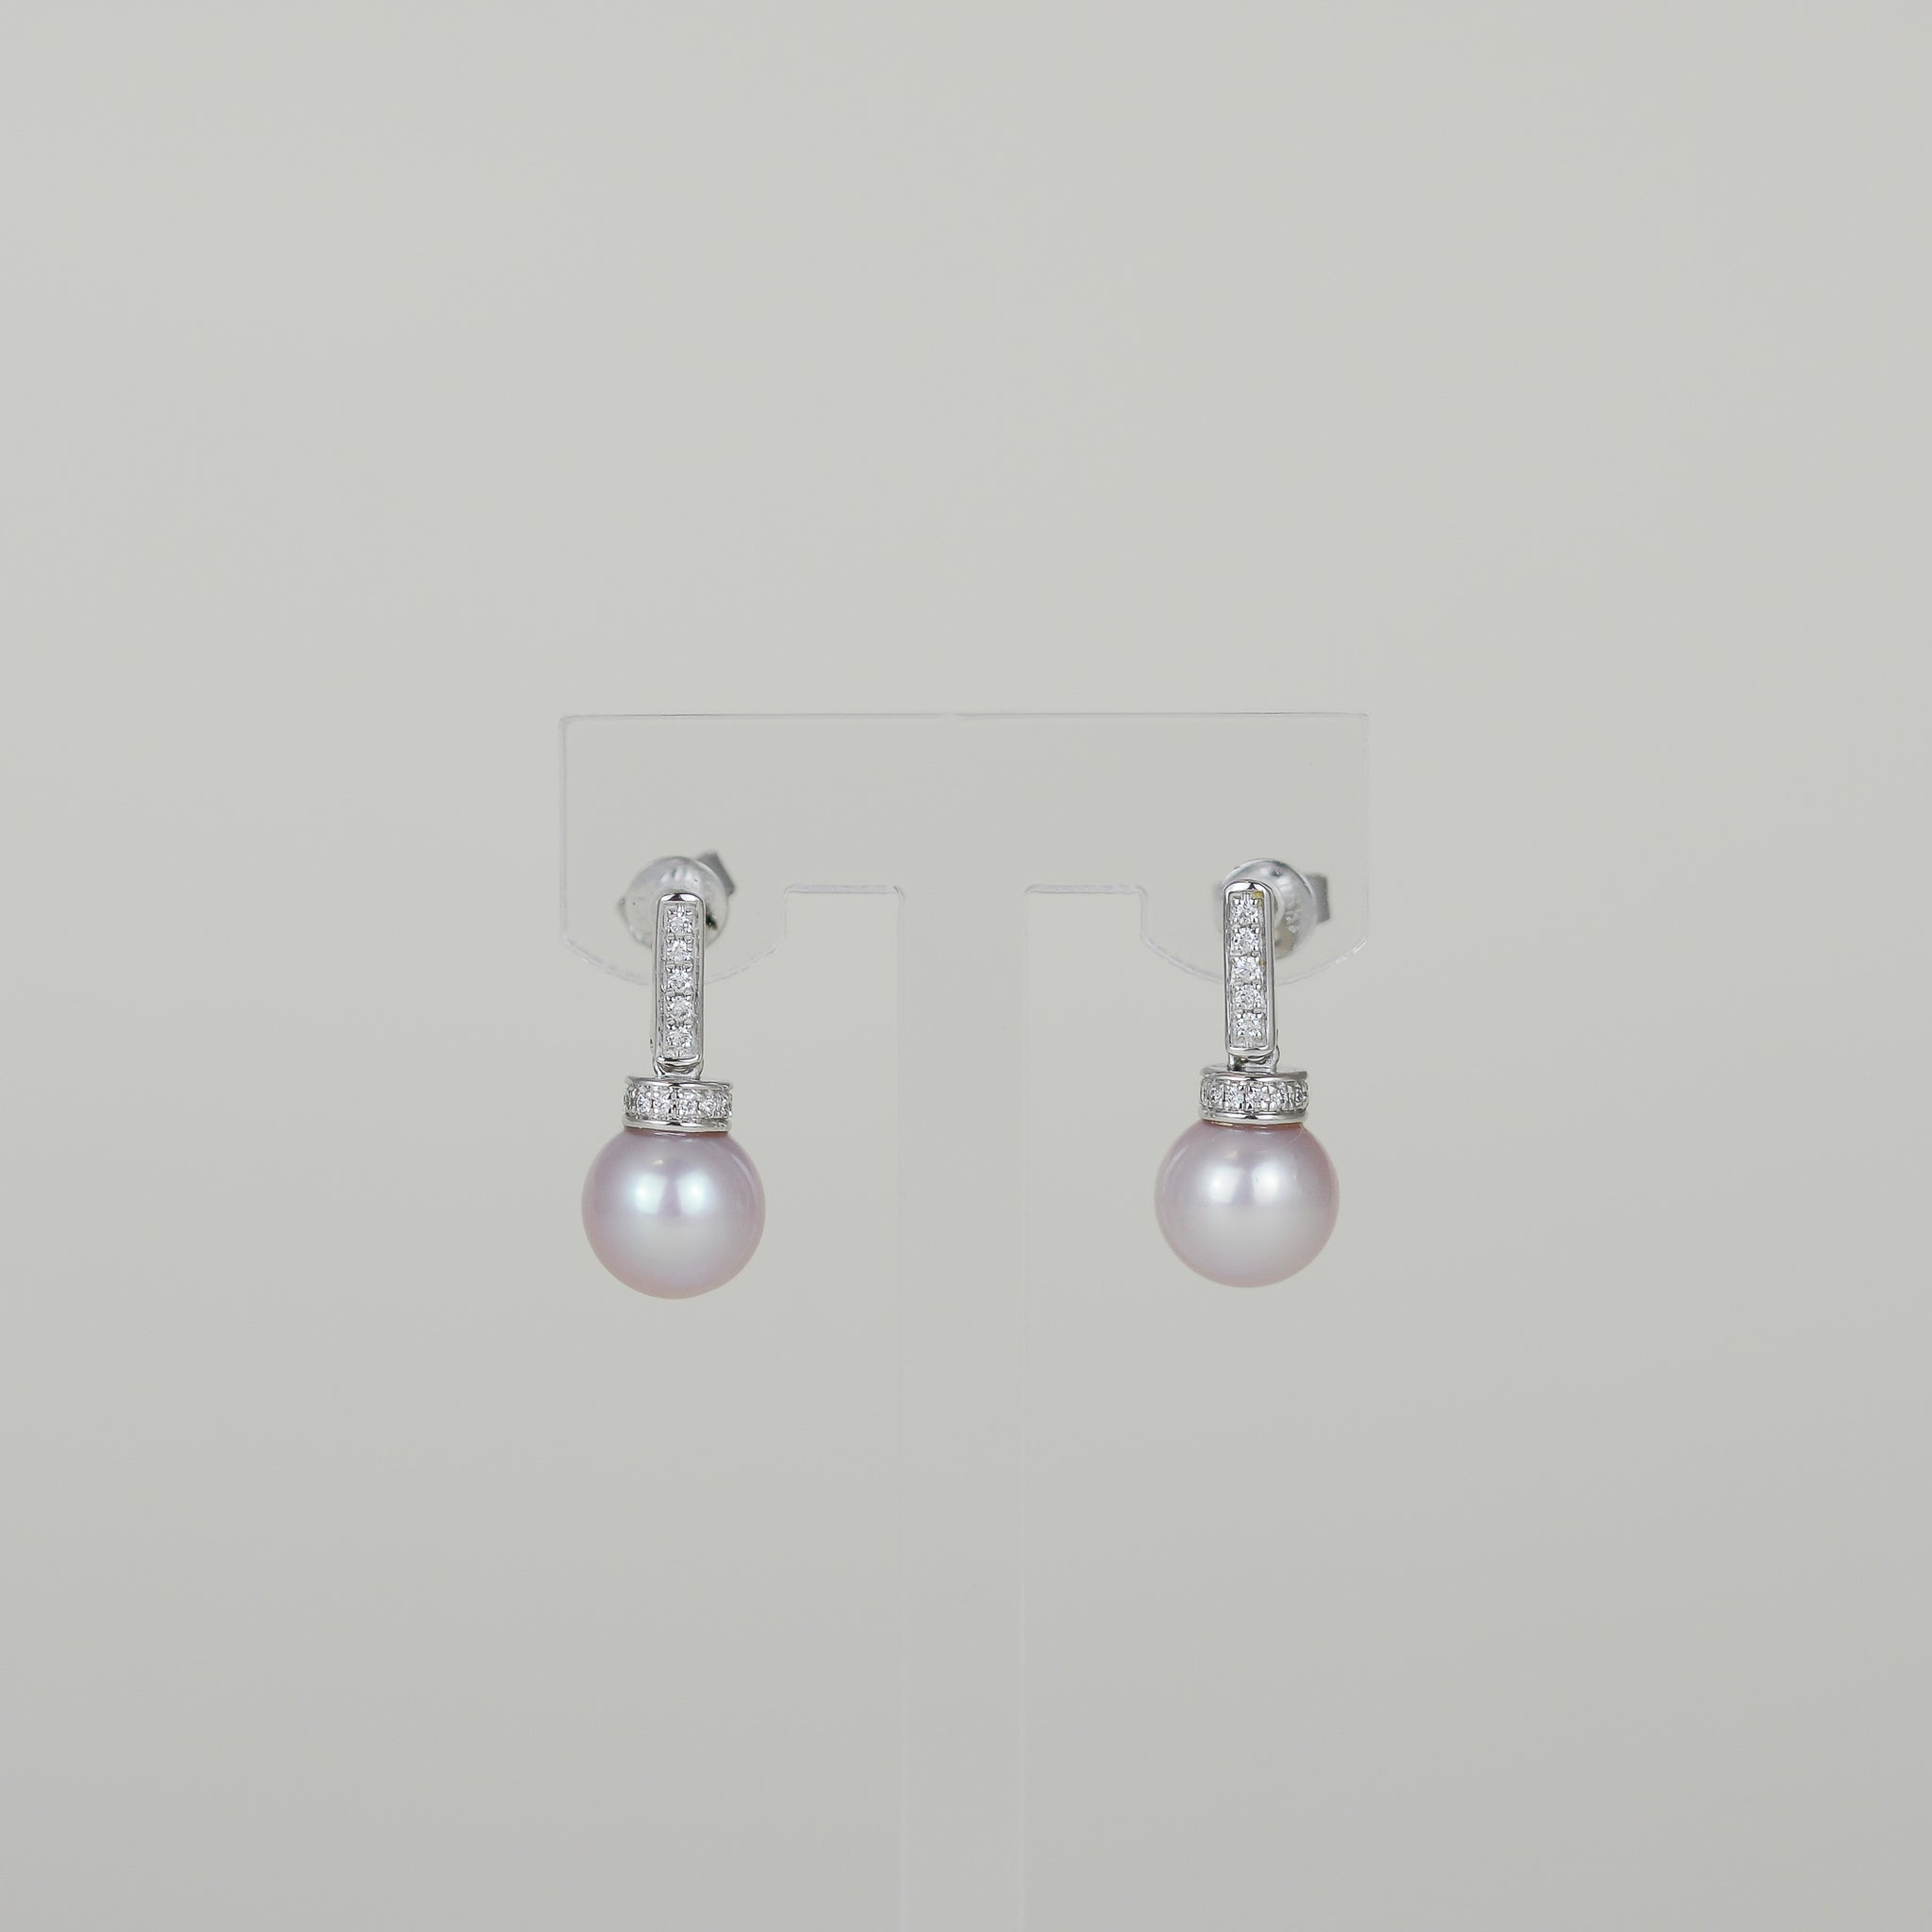 18ct White Gold Round Pearl and Diamond Stud Earrings